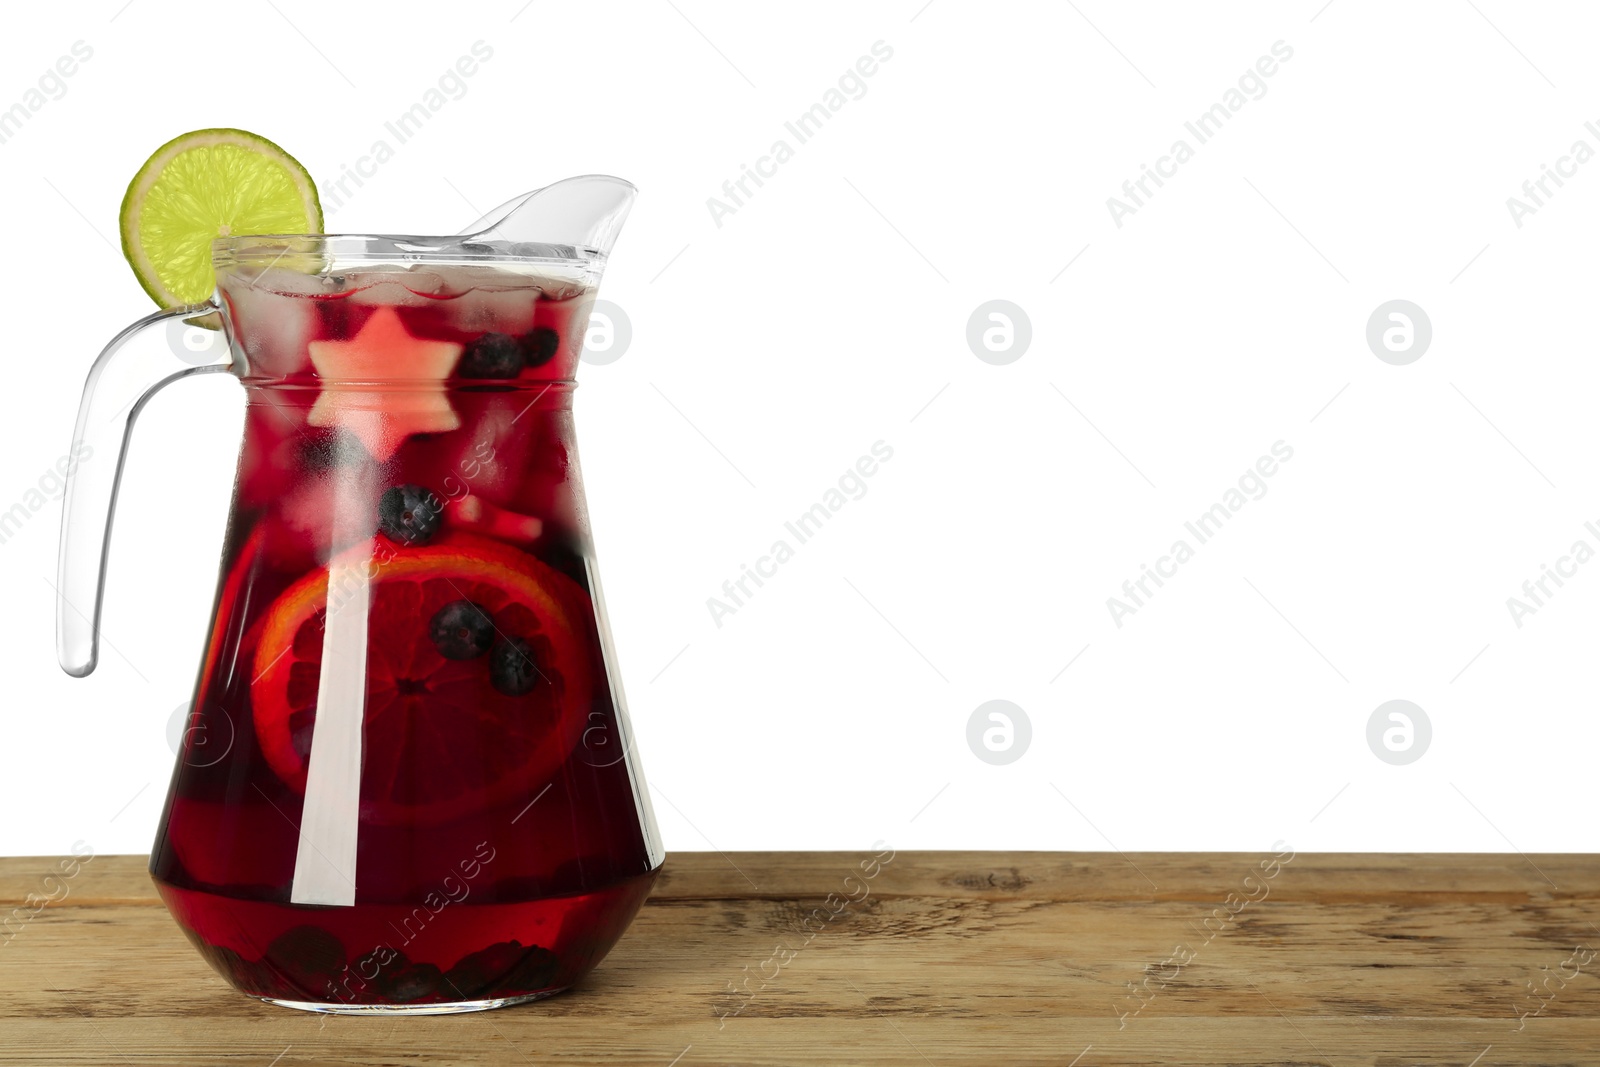 Photo of Glass jug of Red Sangria on wooden table against white background. Space for text